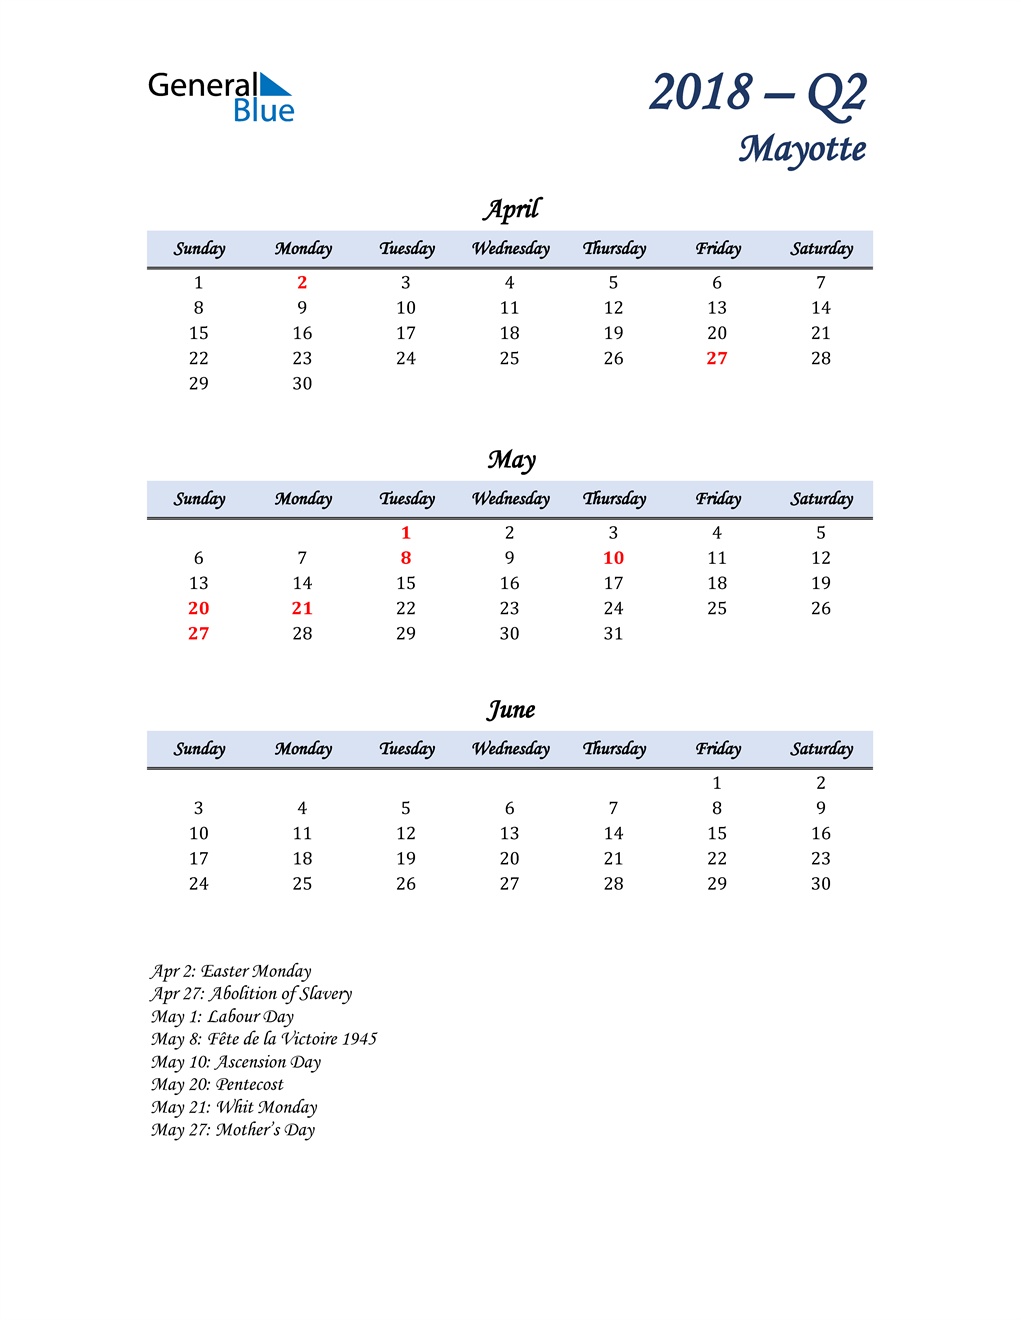  April, May, and June Calendar for Mayotte